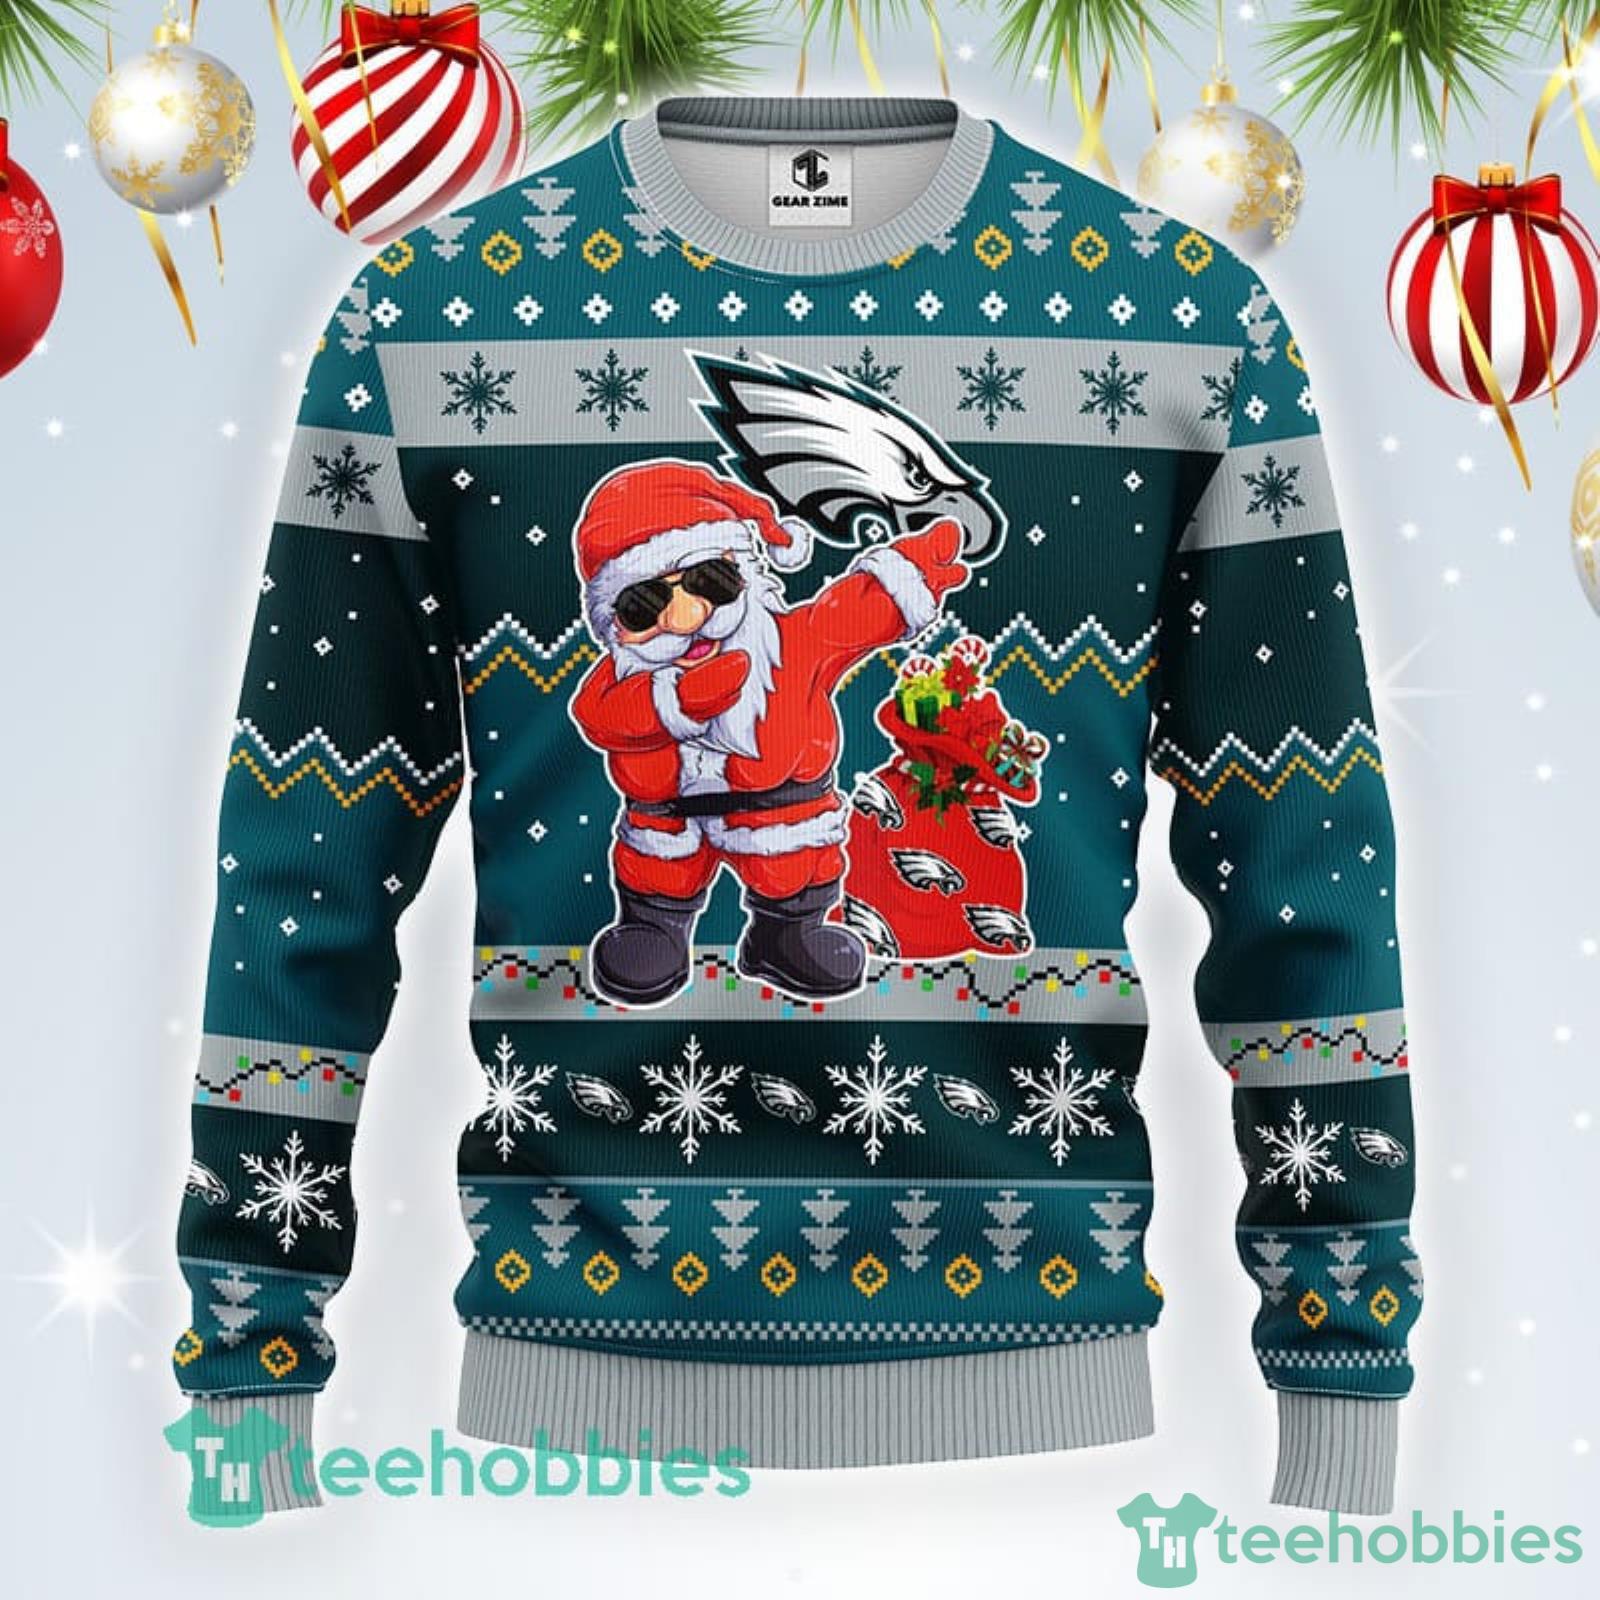 Eagles Christmas Sweater - Funny Ugly Christmas Sweater